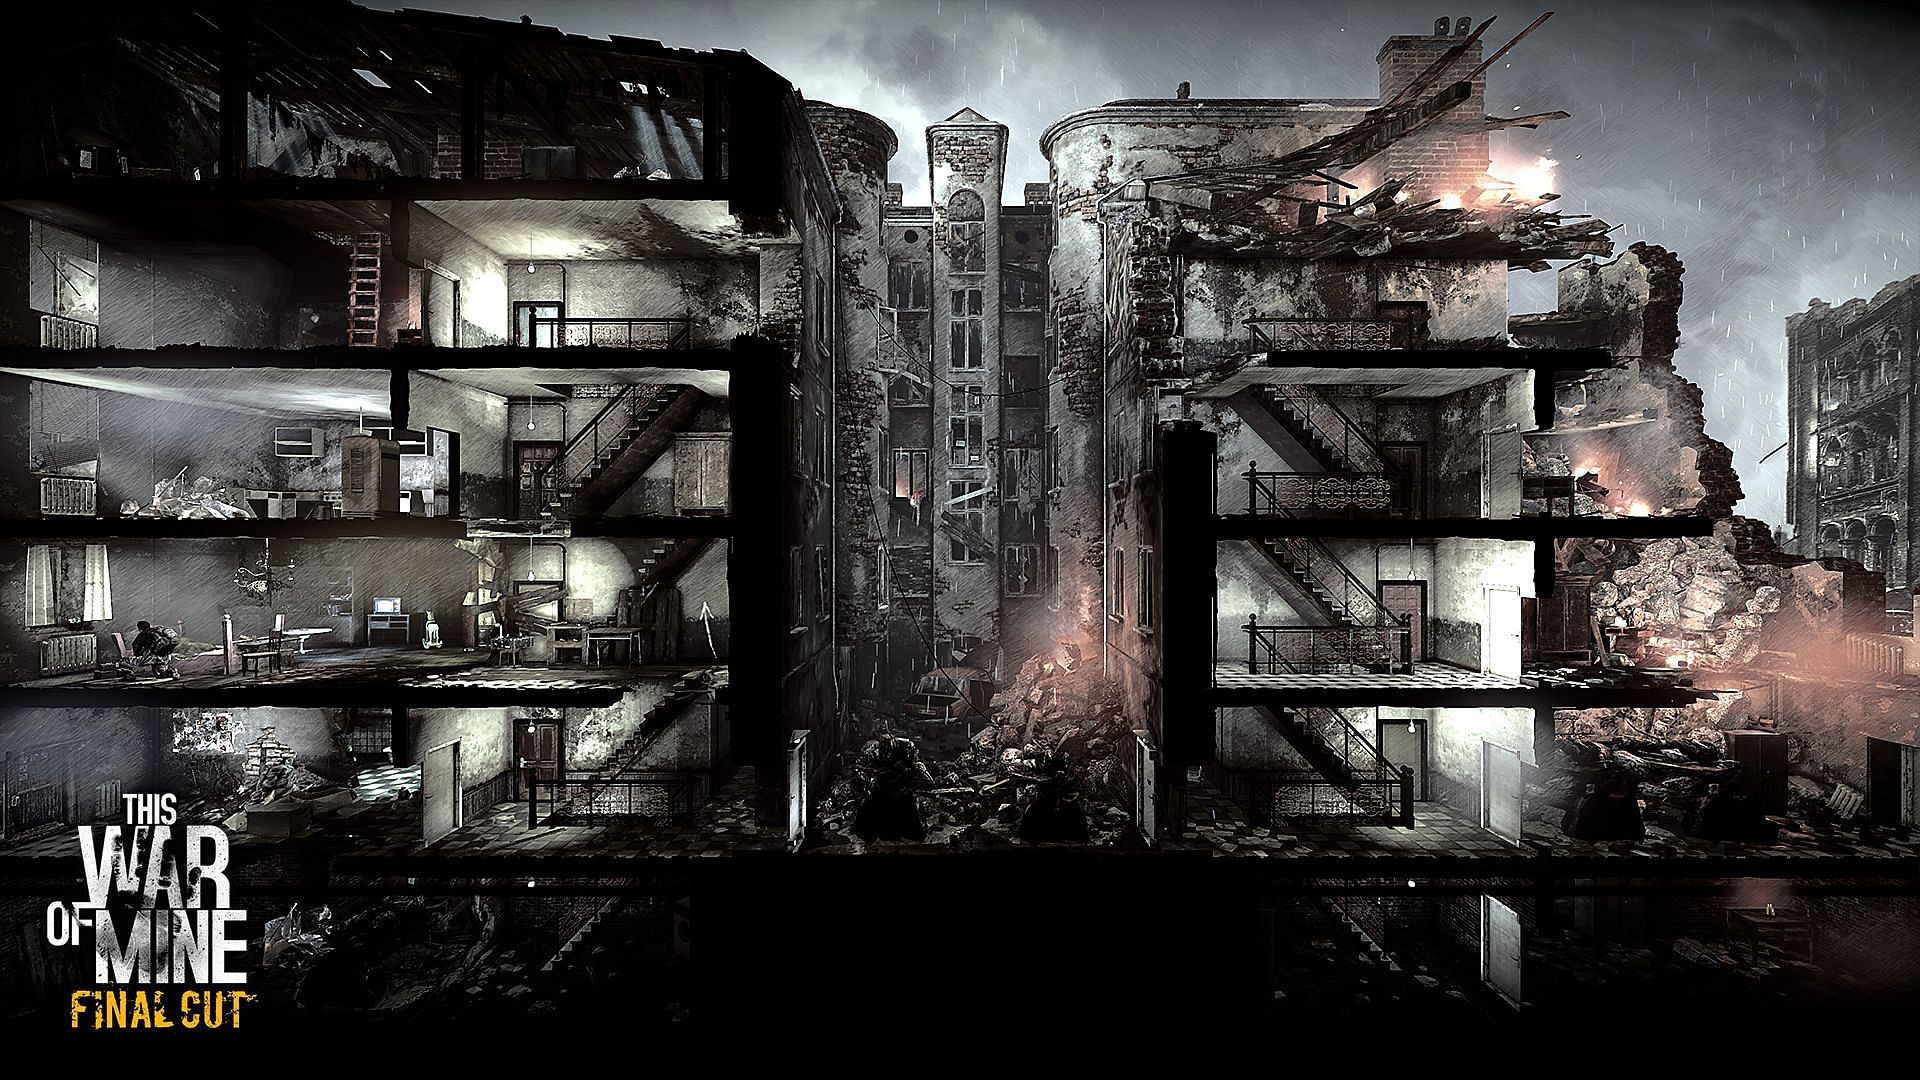 The ravages of war (Image via This War of Mine)